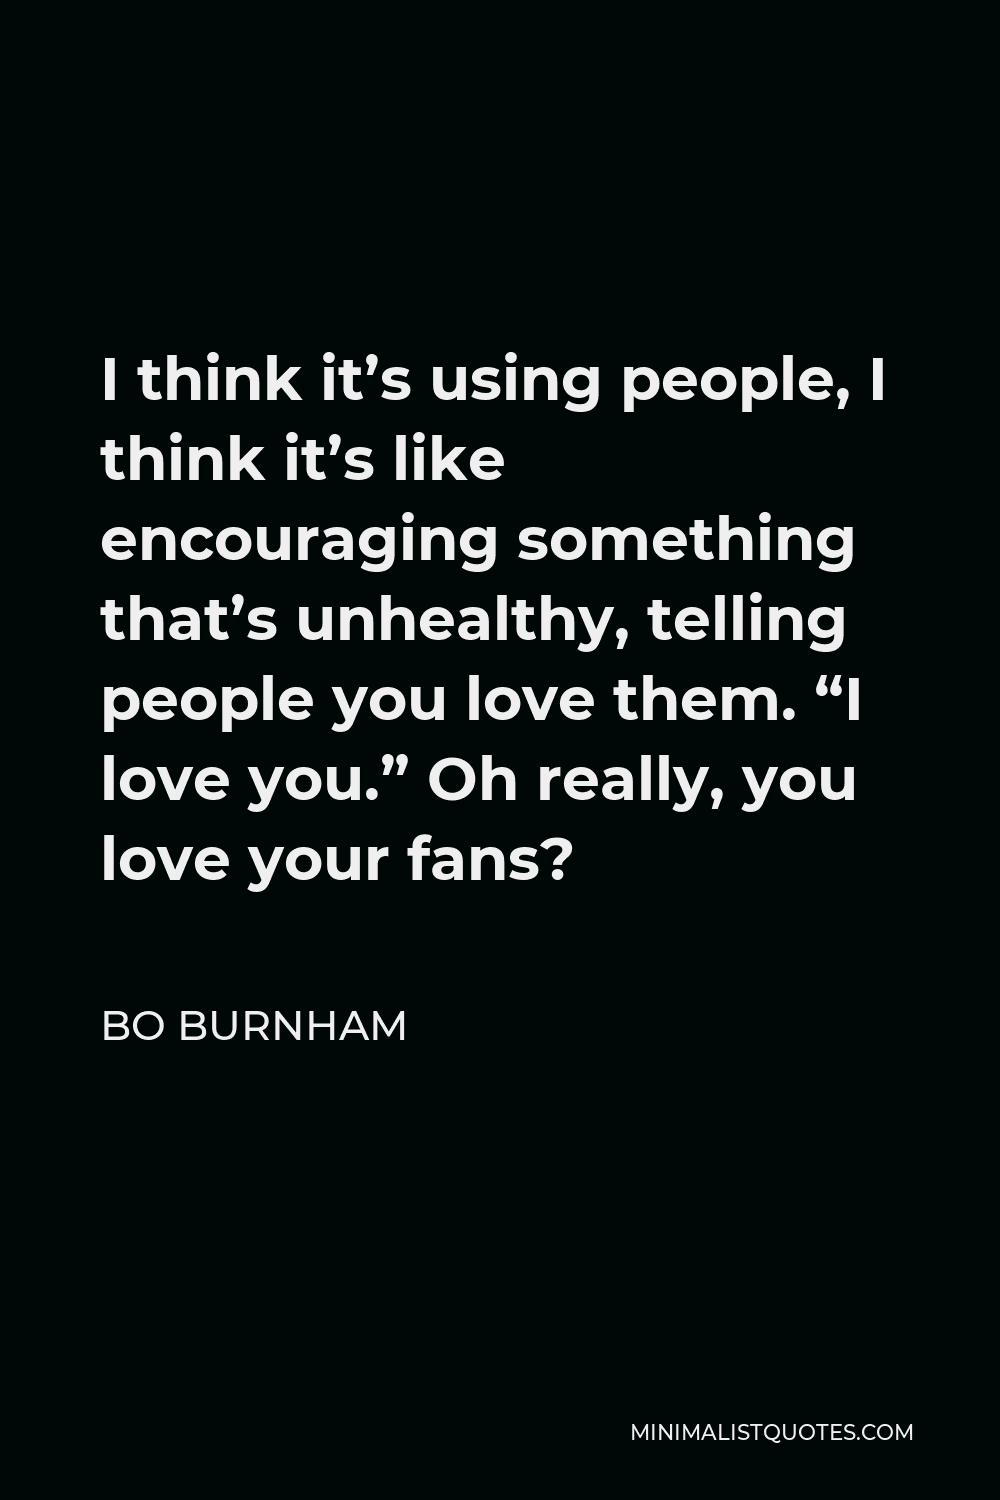 Bo Burnham Quote - I think it’s using people, I think it’s like encouraging something that’s unhealthy, telling people you love them. “I love you.” Oh really, you love your fans?